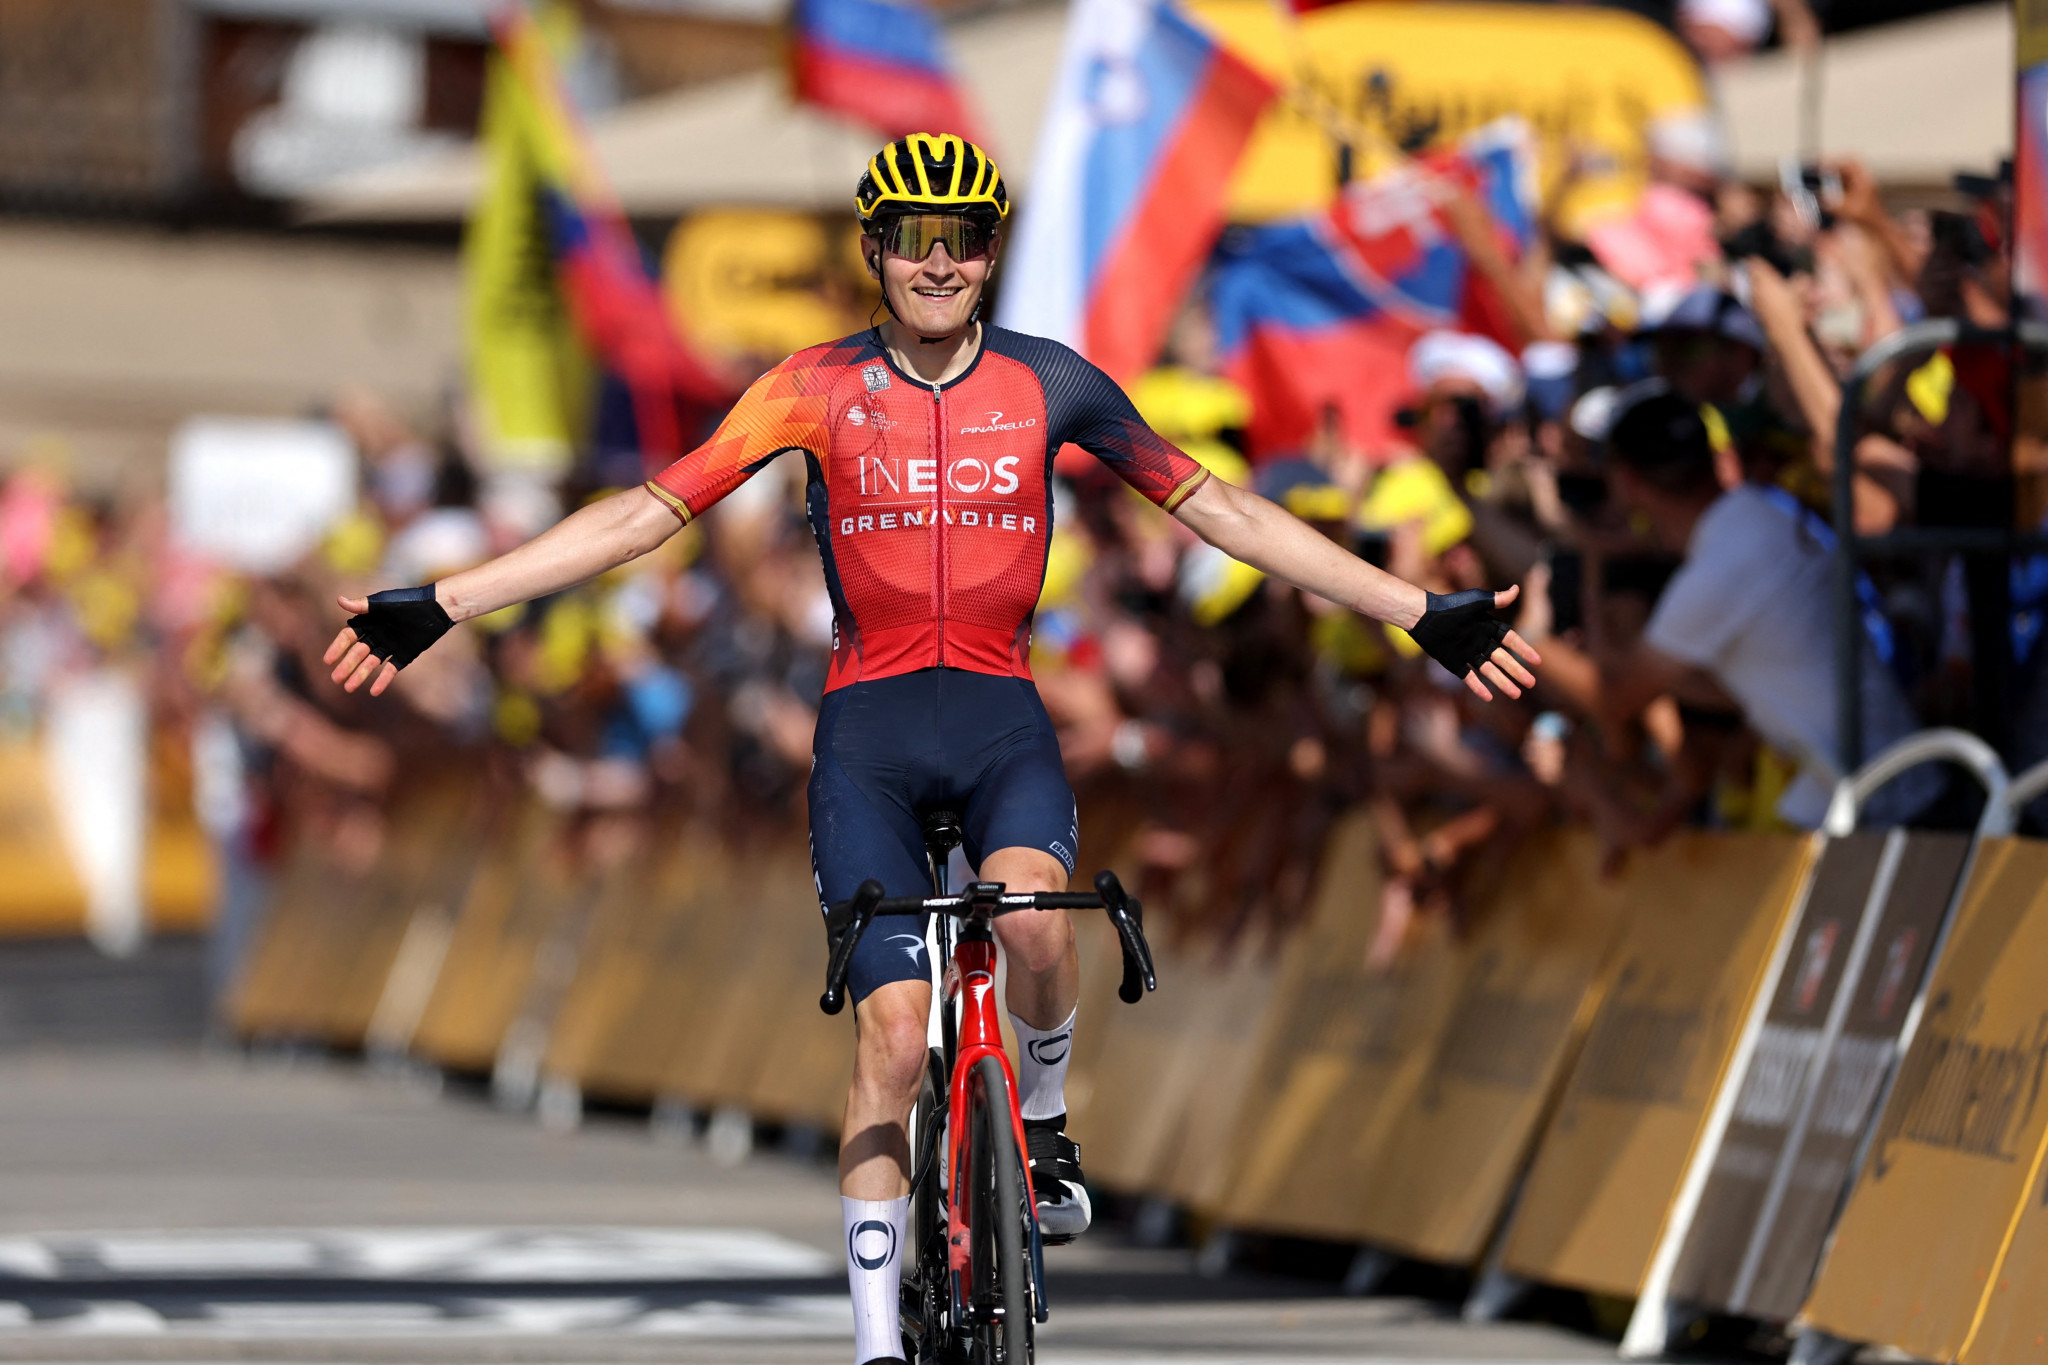 Rodriguez moves to third in overall Tour de France standings after stage 14 win